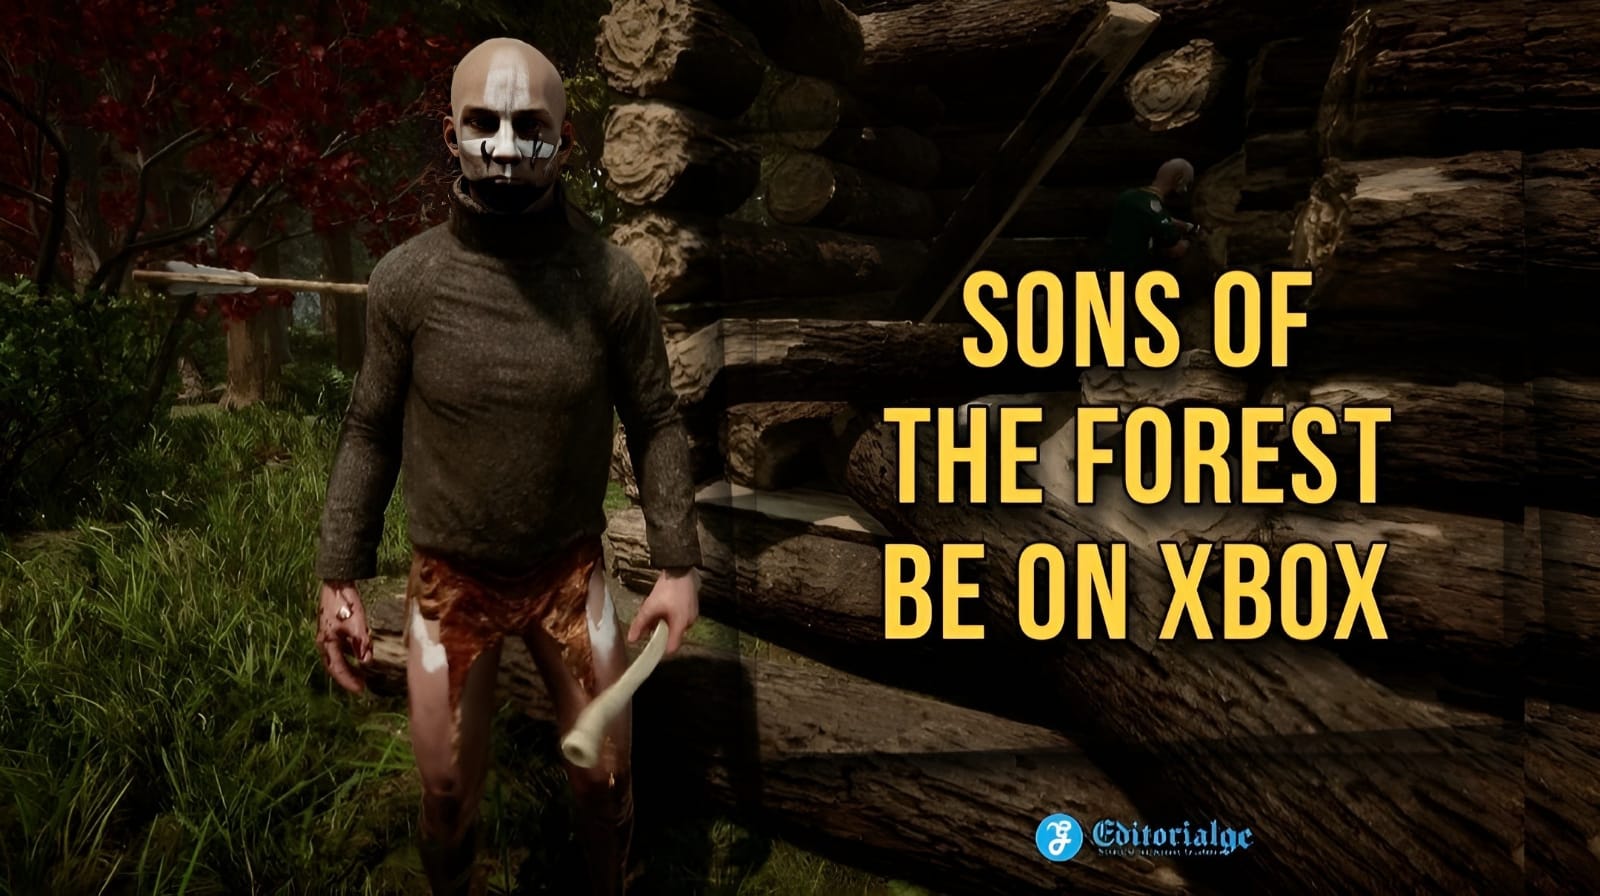 The Forest PS4 Sequel Sons Of The Forest Announced - PlayStation Universe